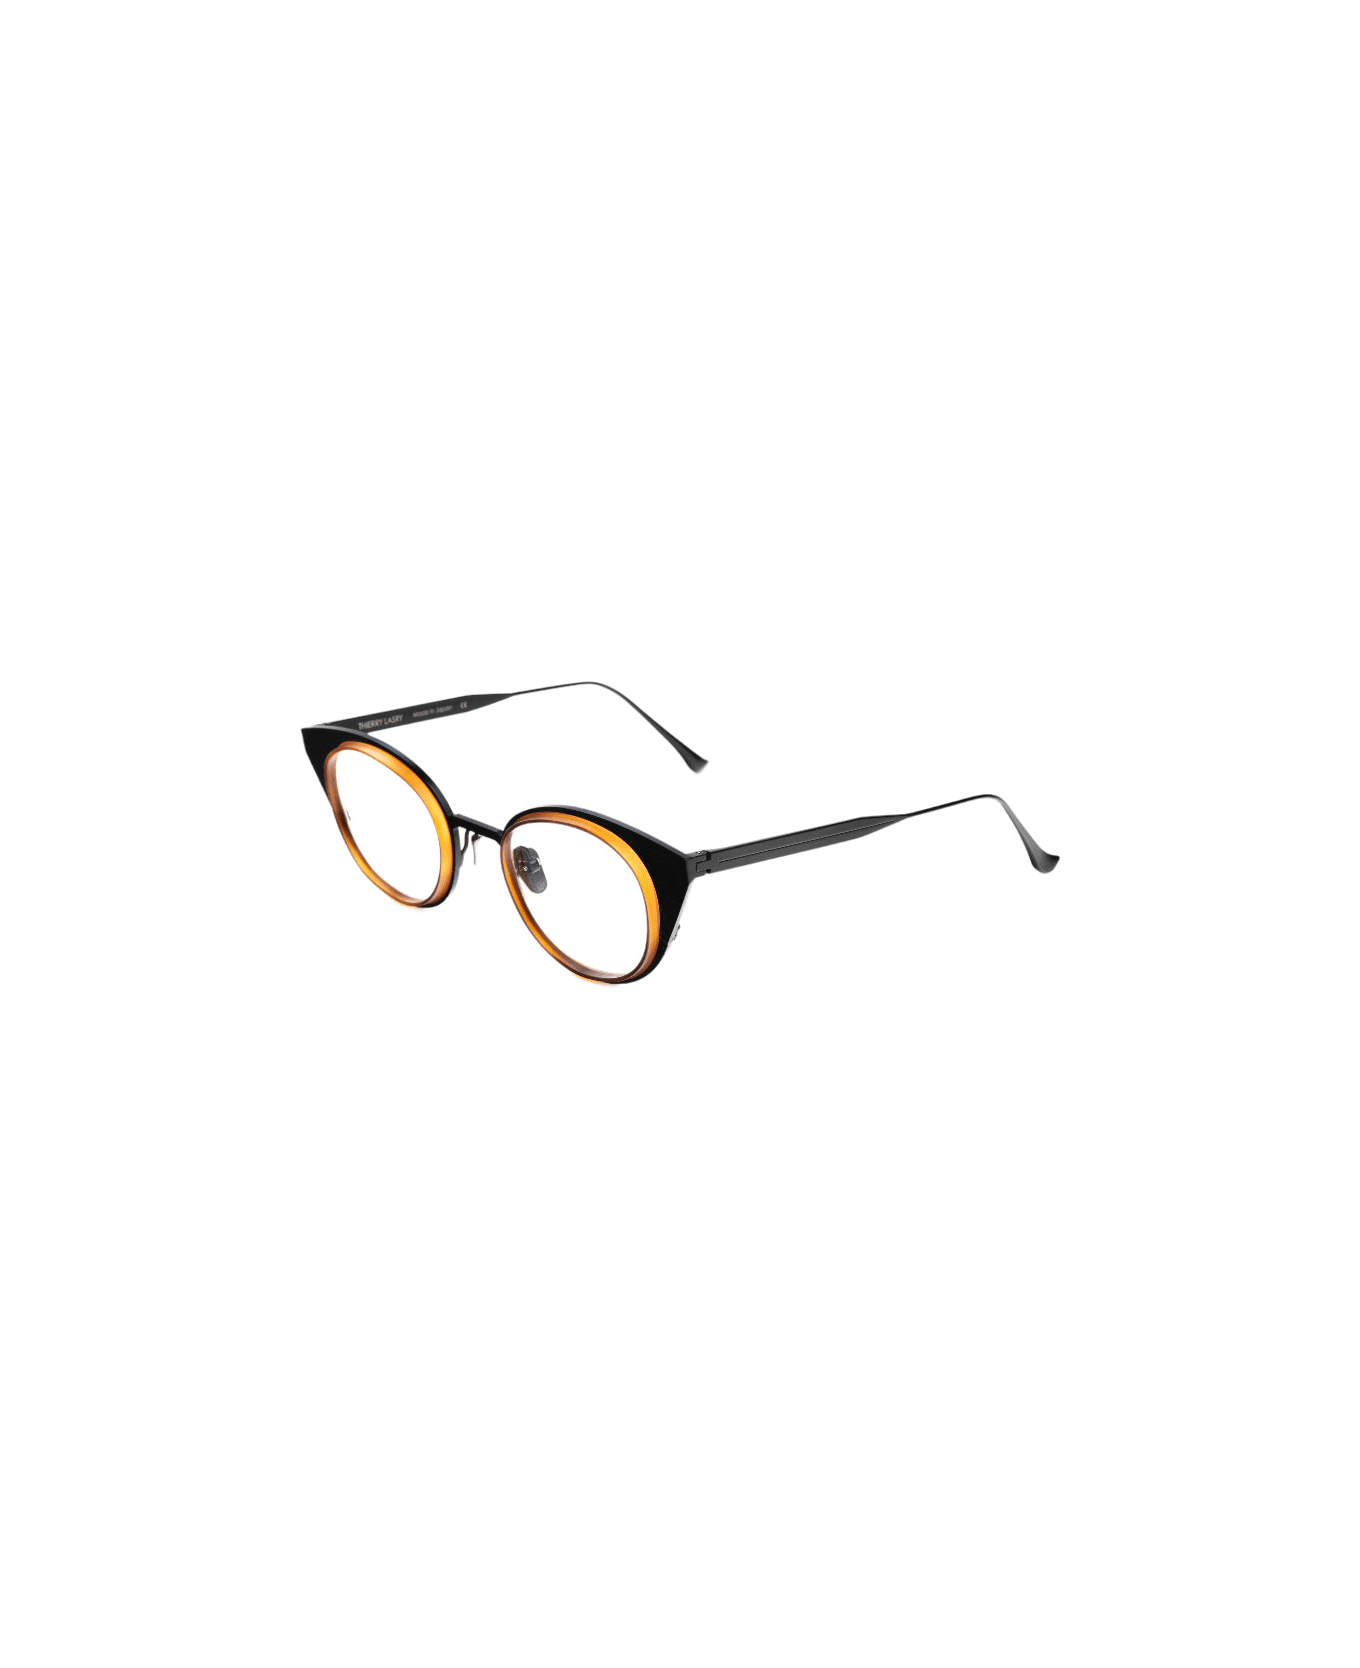 Thierry Lasry Anxiety - Black Glasses